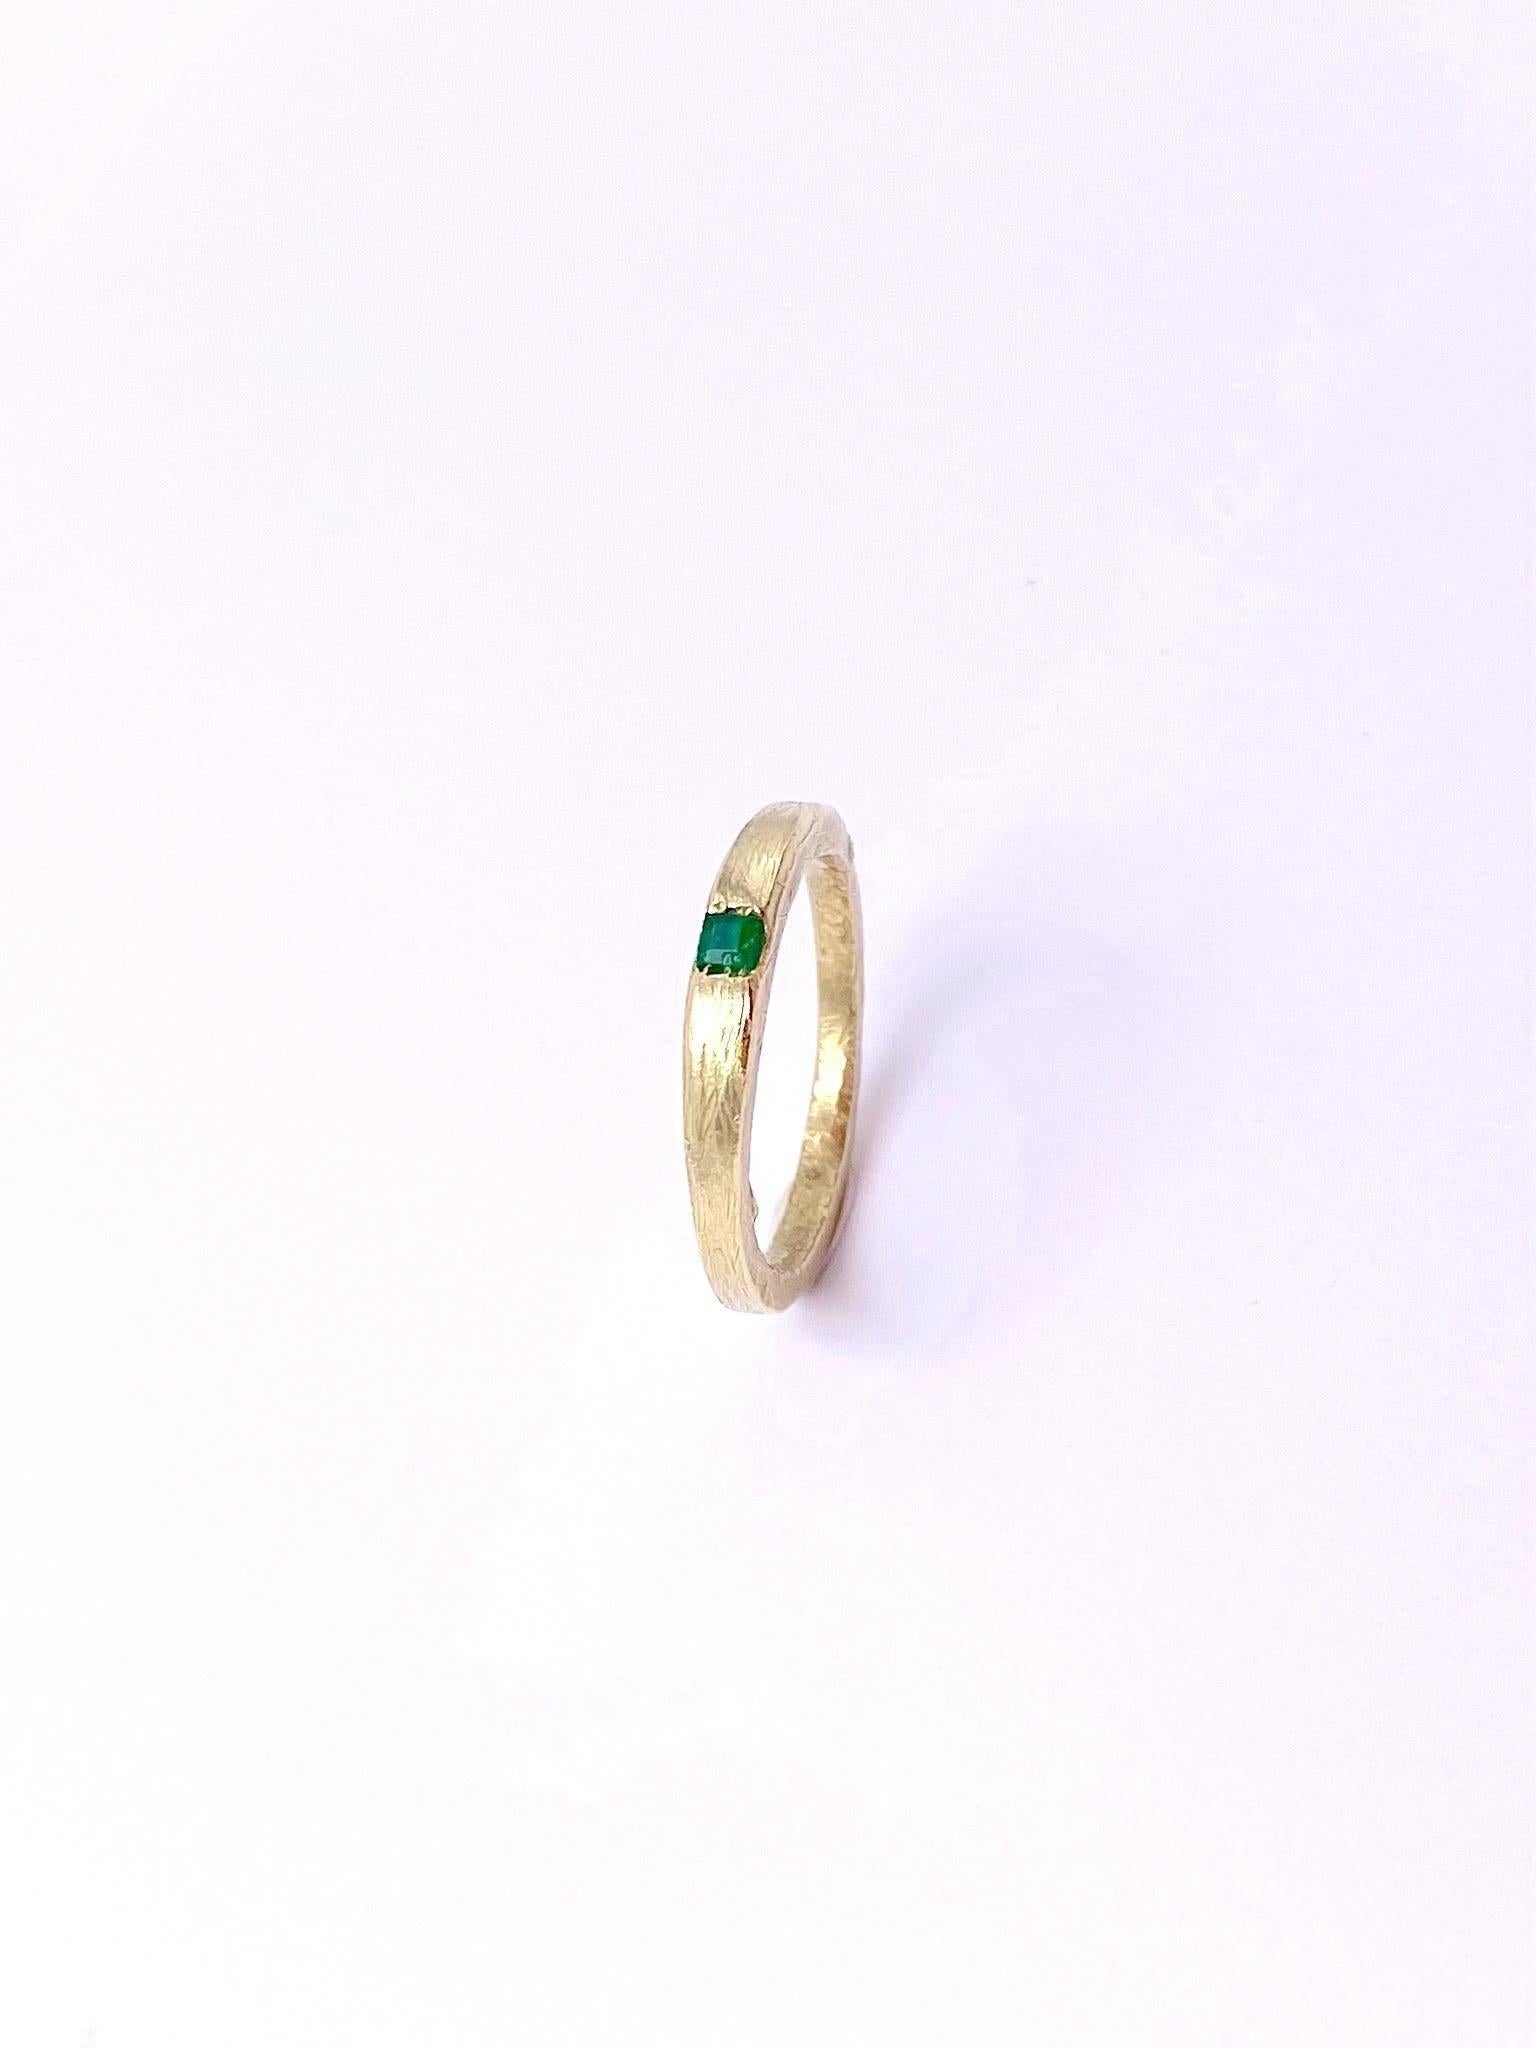 Unisex Emerald 18 Karat Yellow Gold Handcrafted Modern Organic Design Band Ring For Sale 3